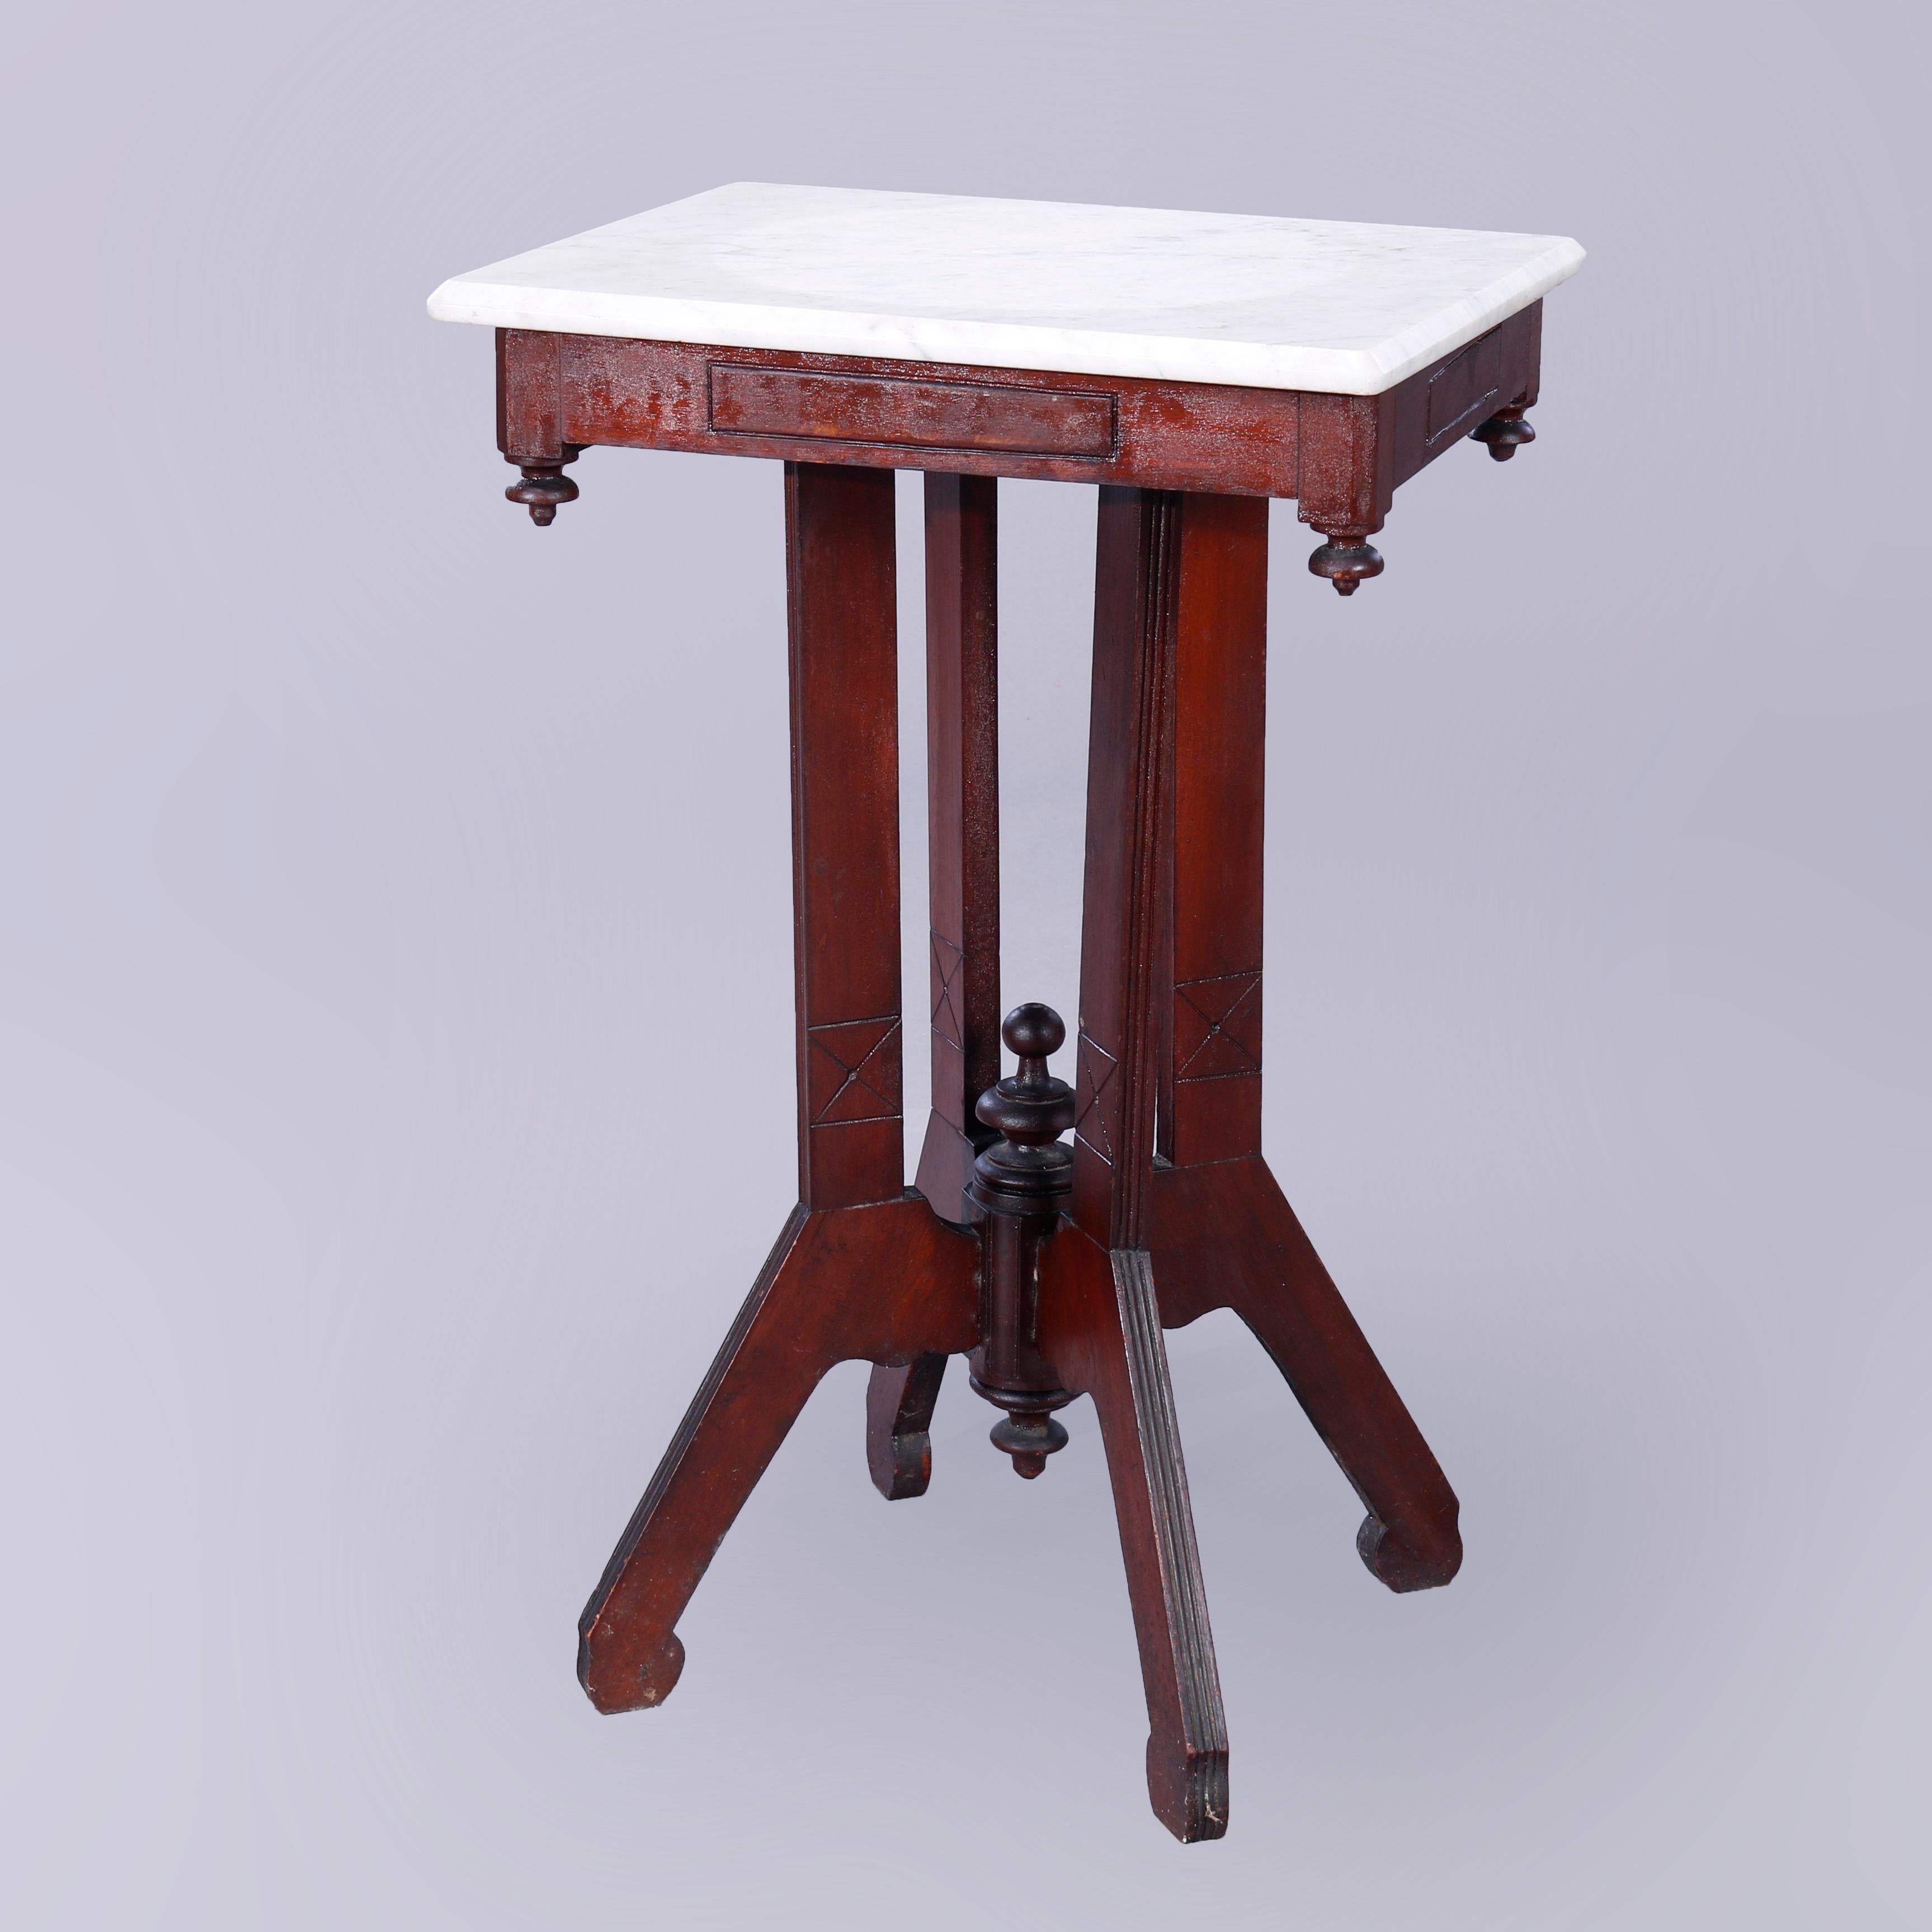 An antique Eastlake side stand offers beveled marble top over incised walnut base with drop corner finials and raised on flared reeded legs with central turned finials, c1890

Measures - 29.25''h x 18.5''w x 14.25''d.